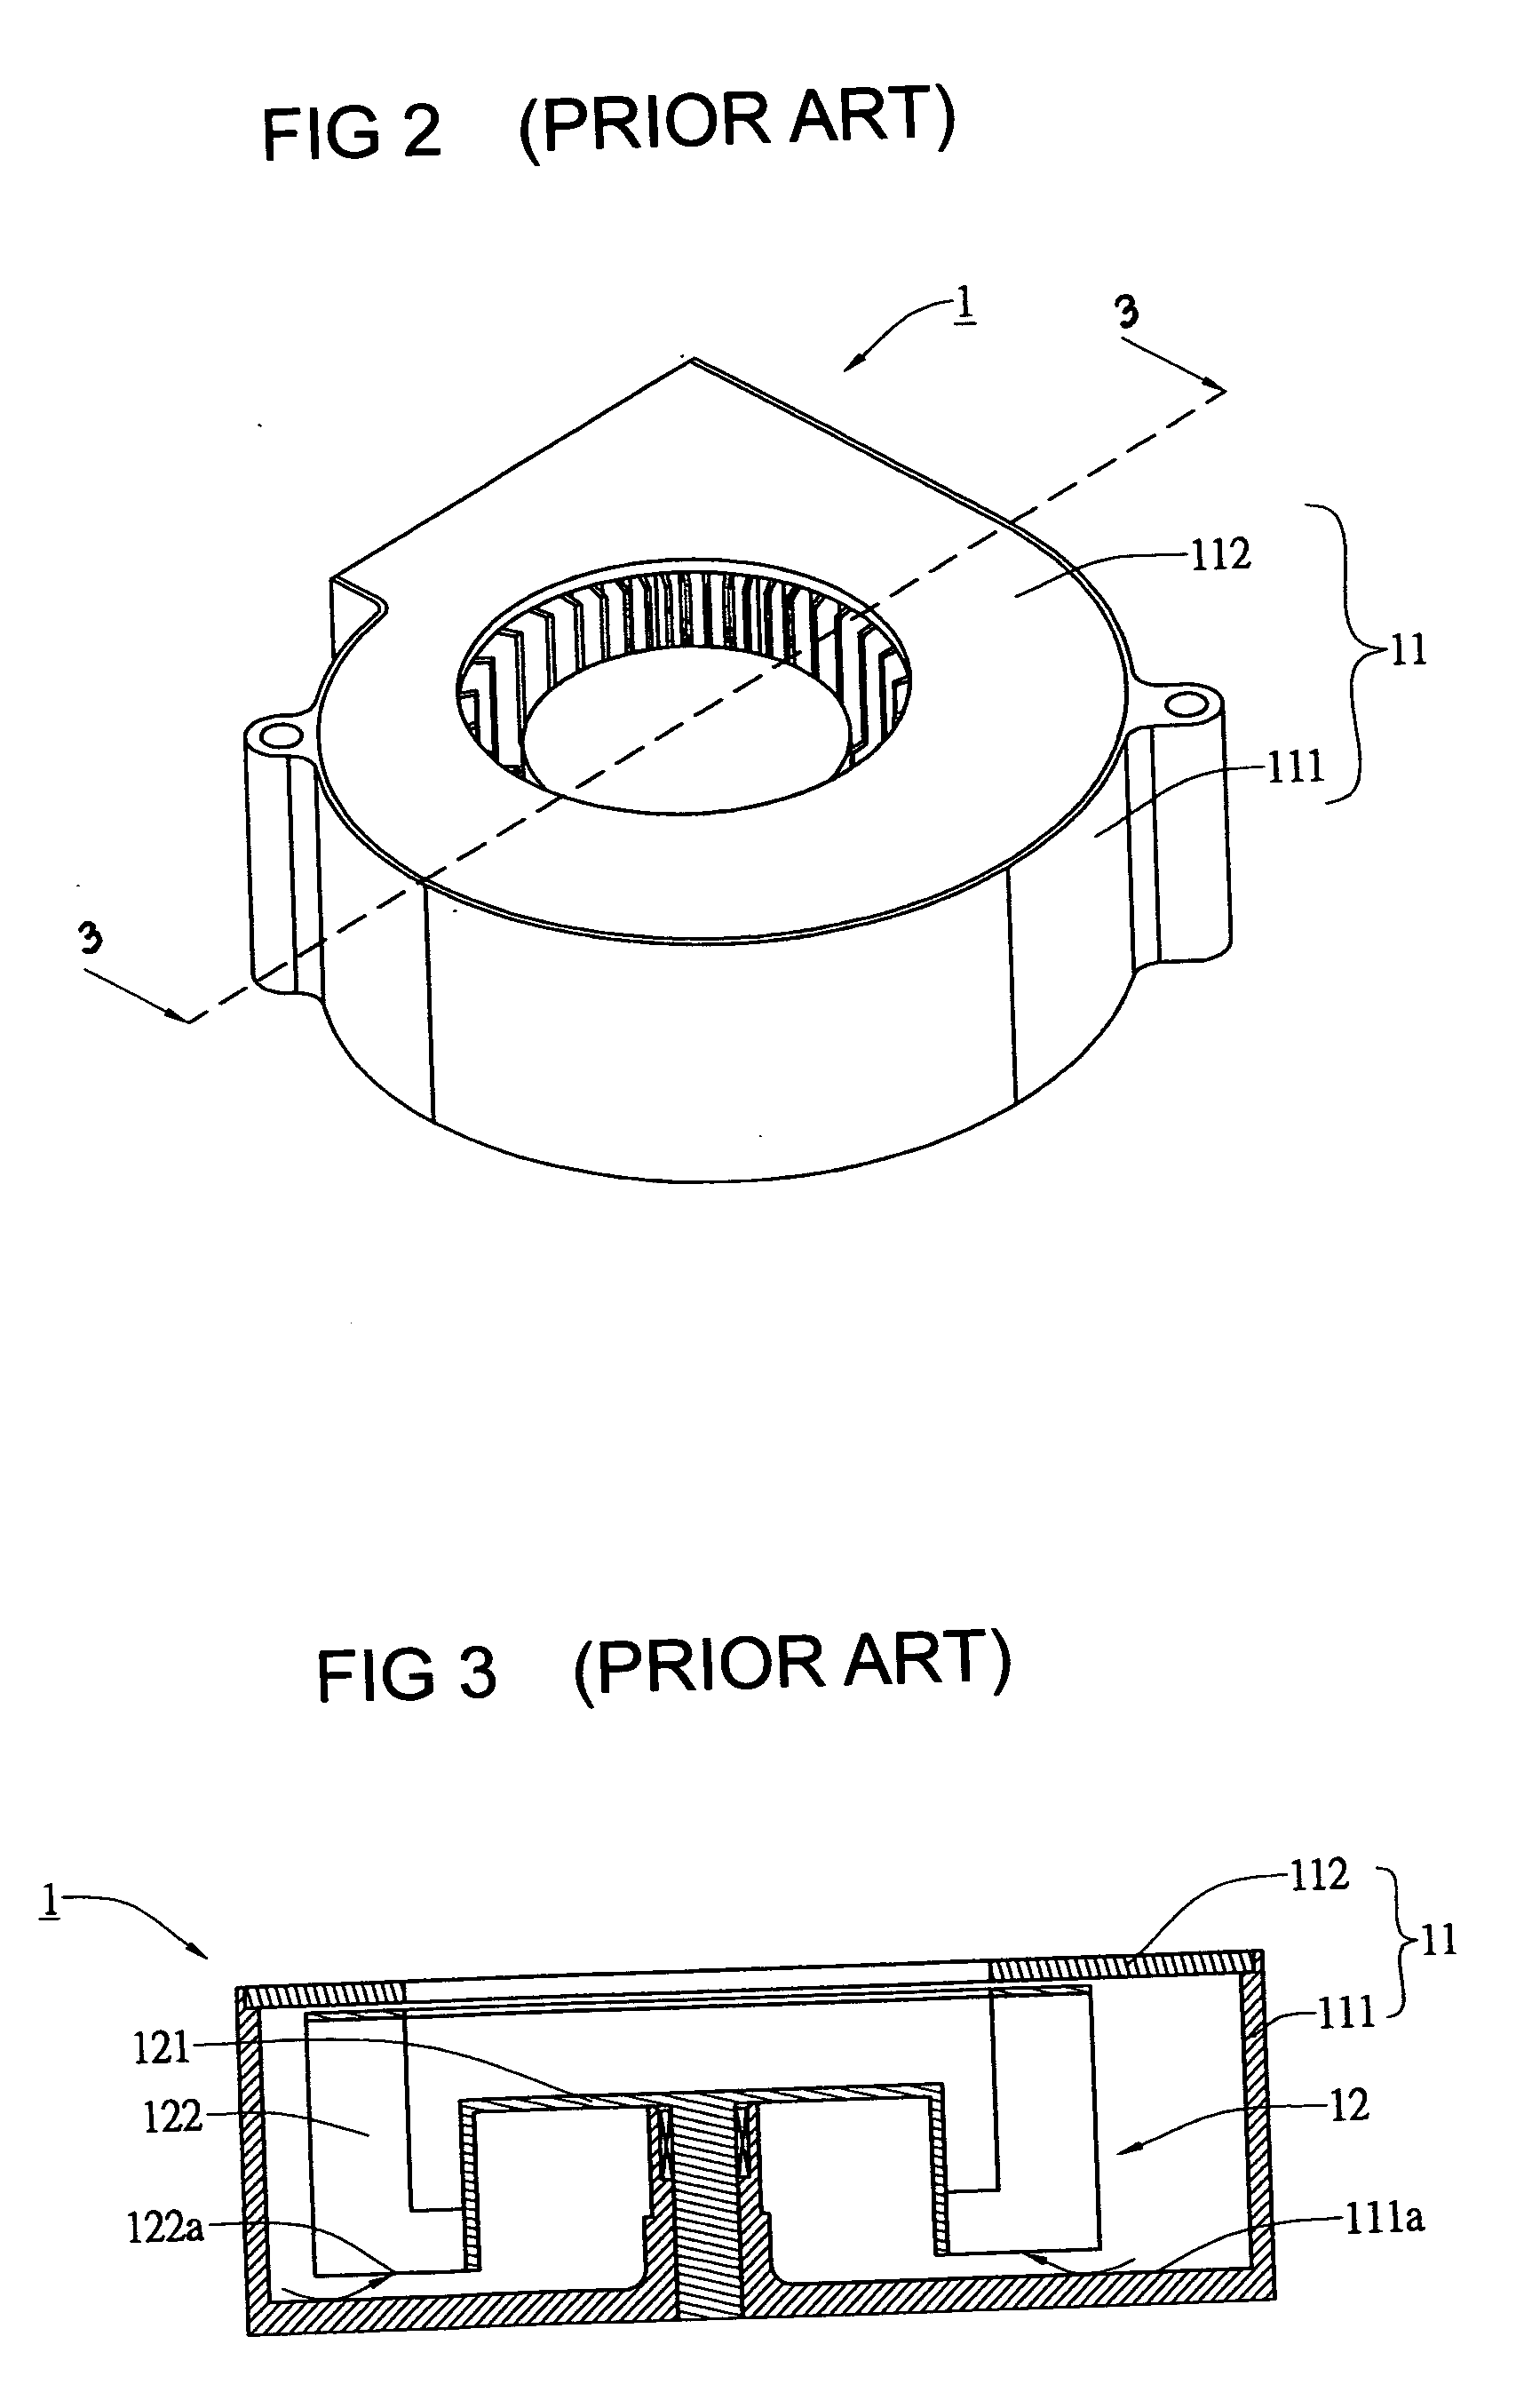 Blower capable of reducing secondary flow